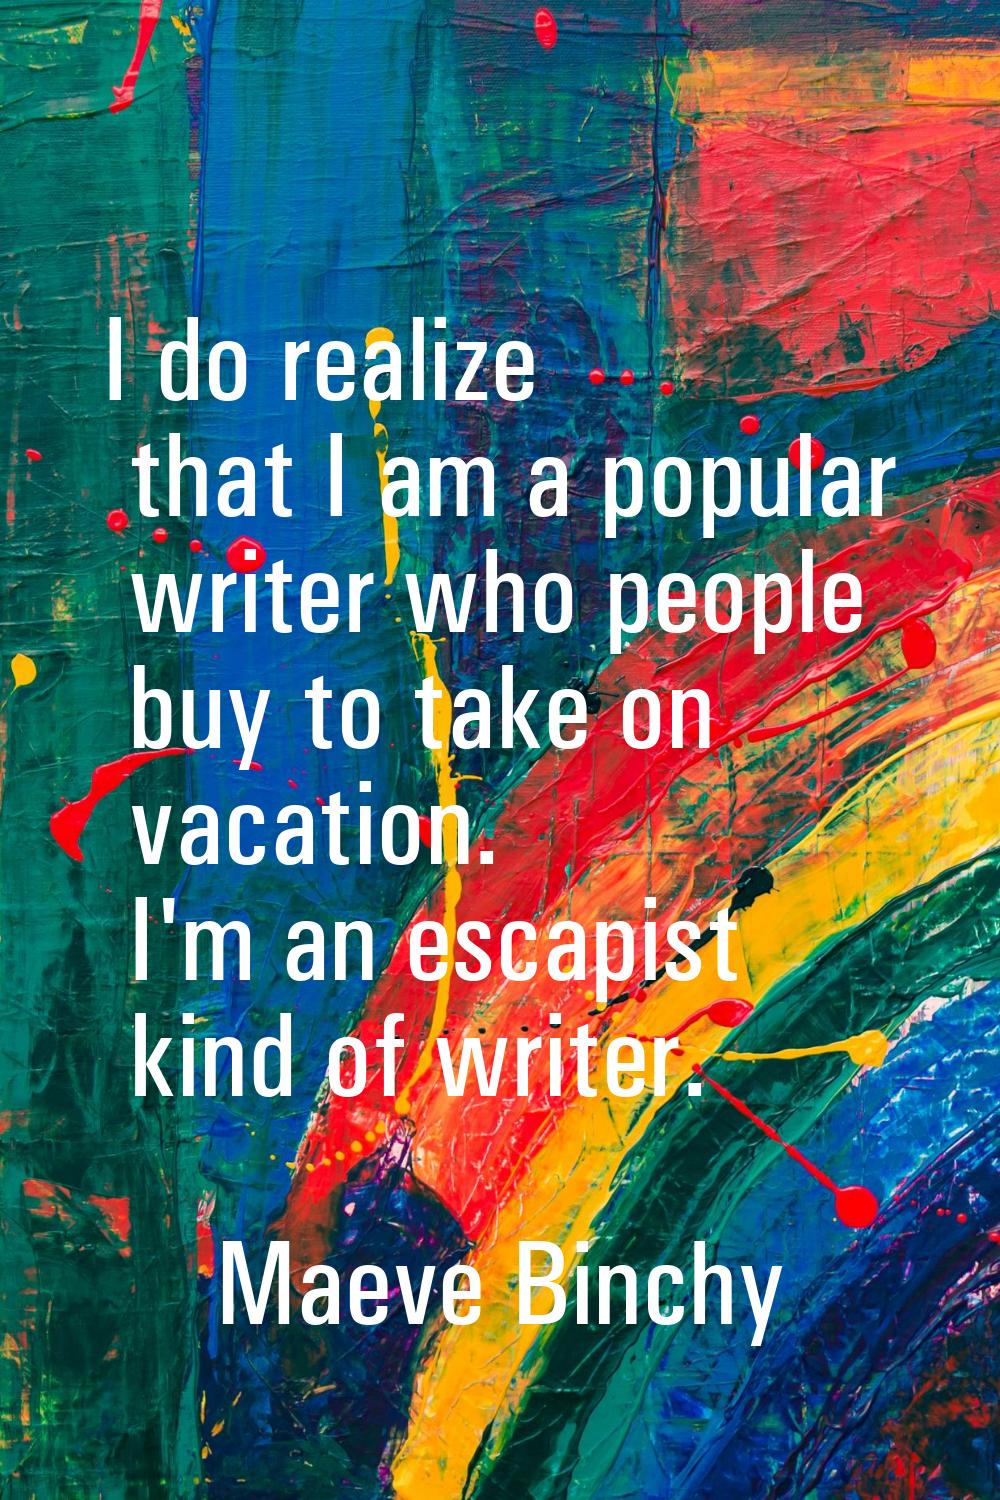 I do realize that I am a popular writer who people buy to take on vacation. I'm an escapist kind of